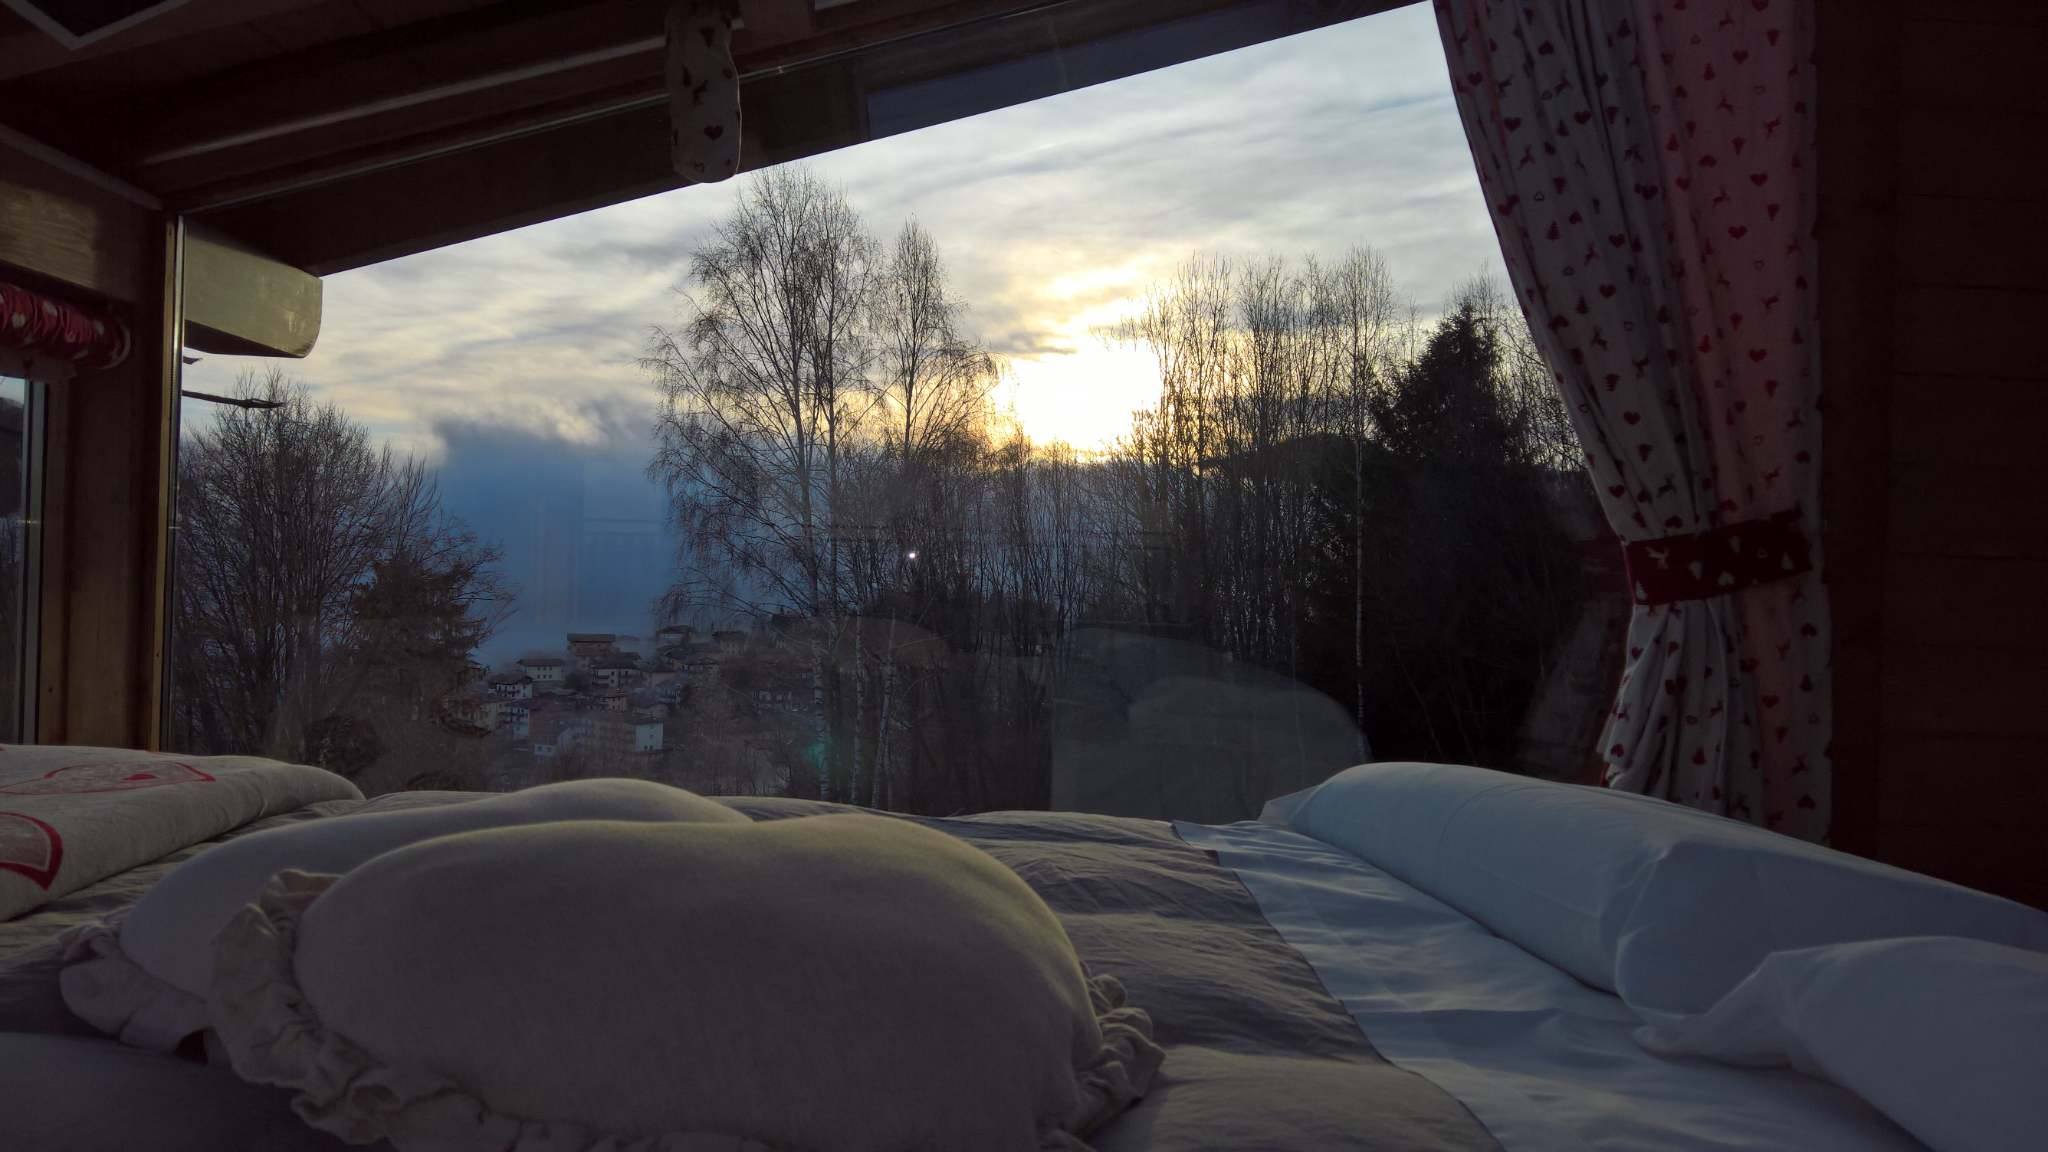 View of the landscape from the bed, cable car